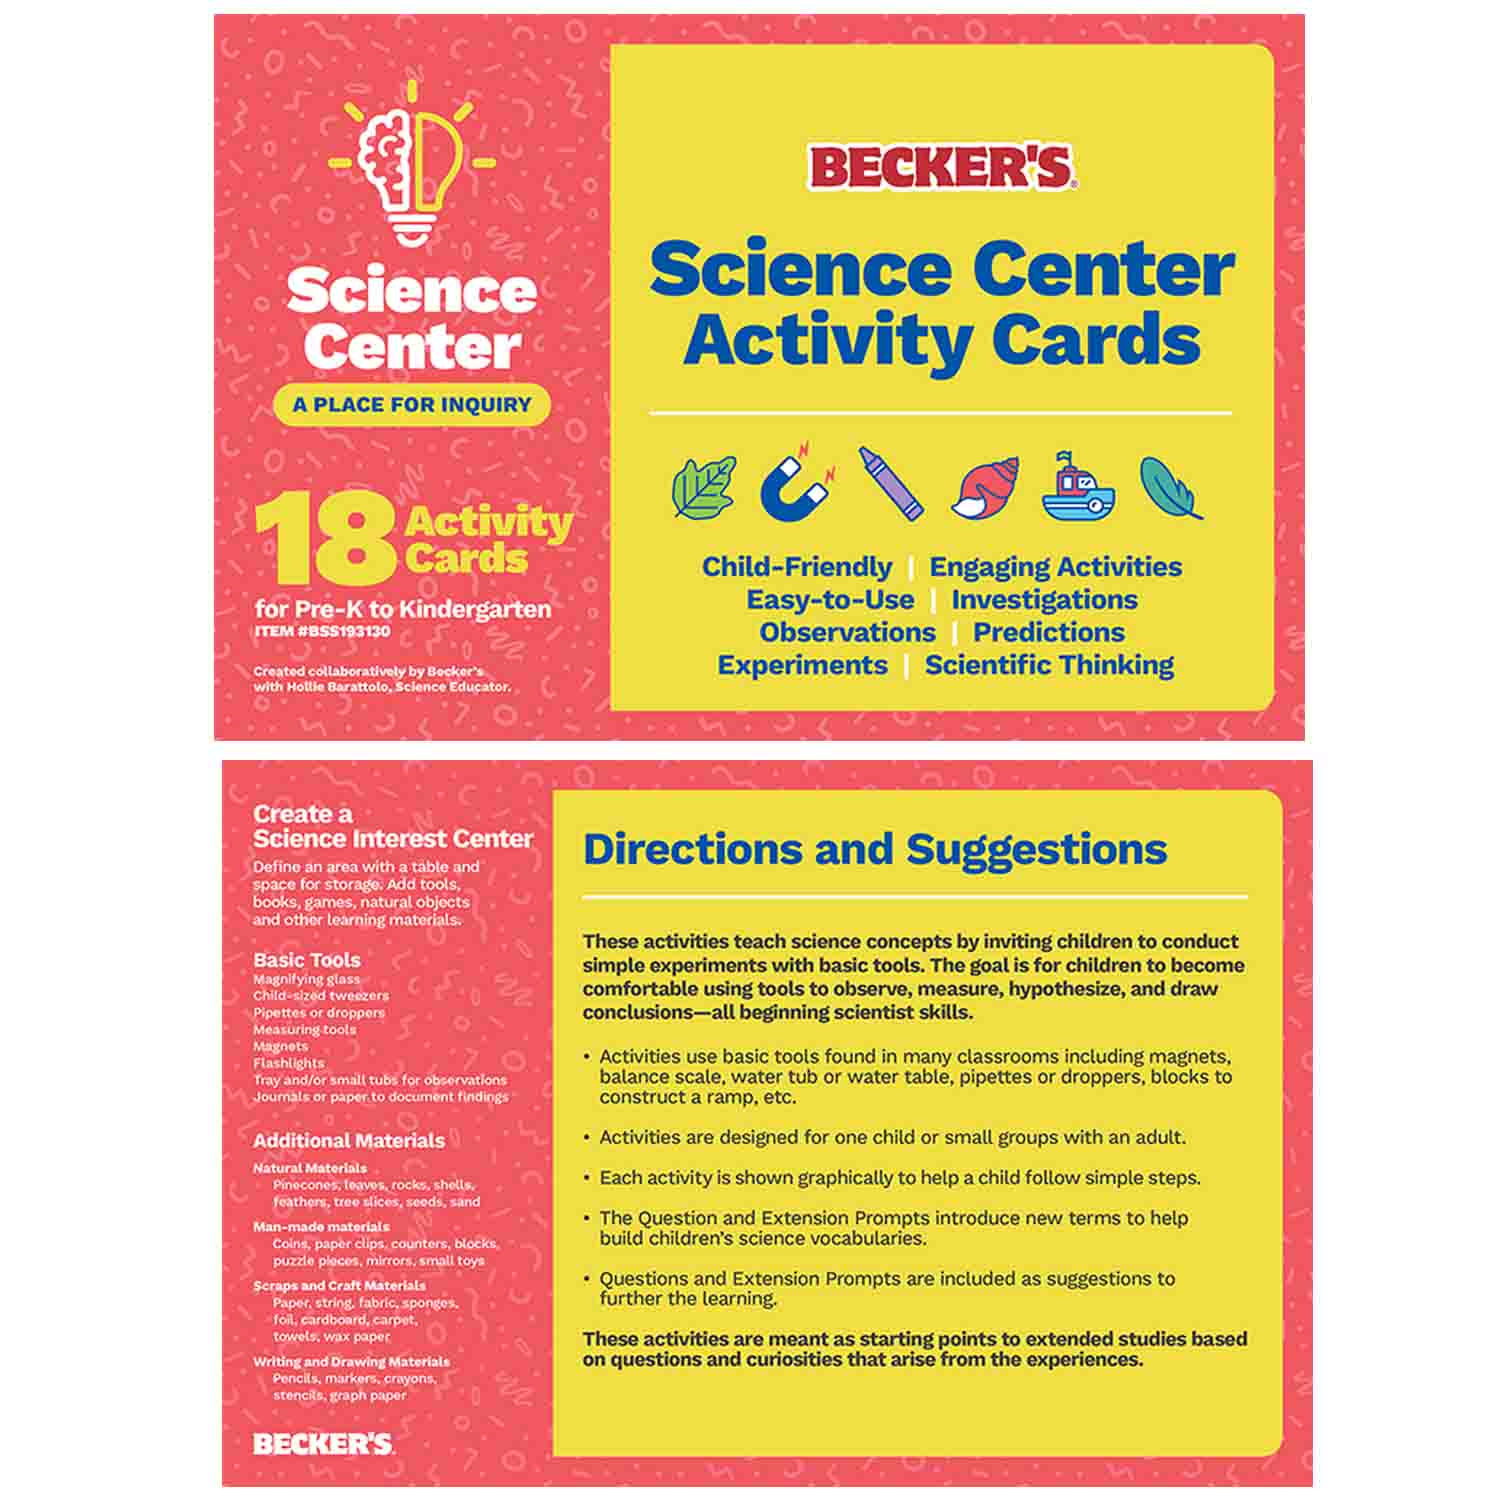 Becker's Science Center Activity Cards